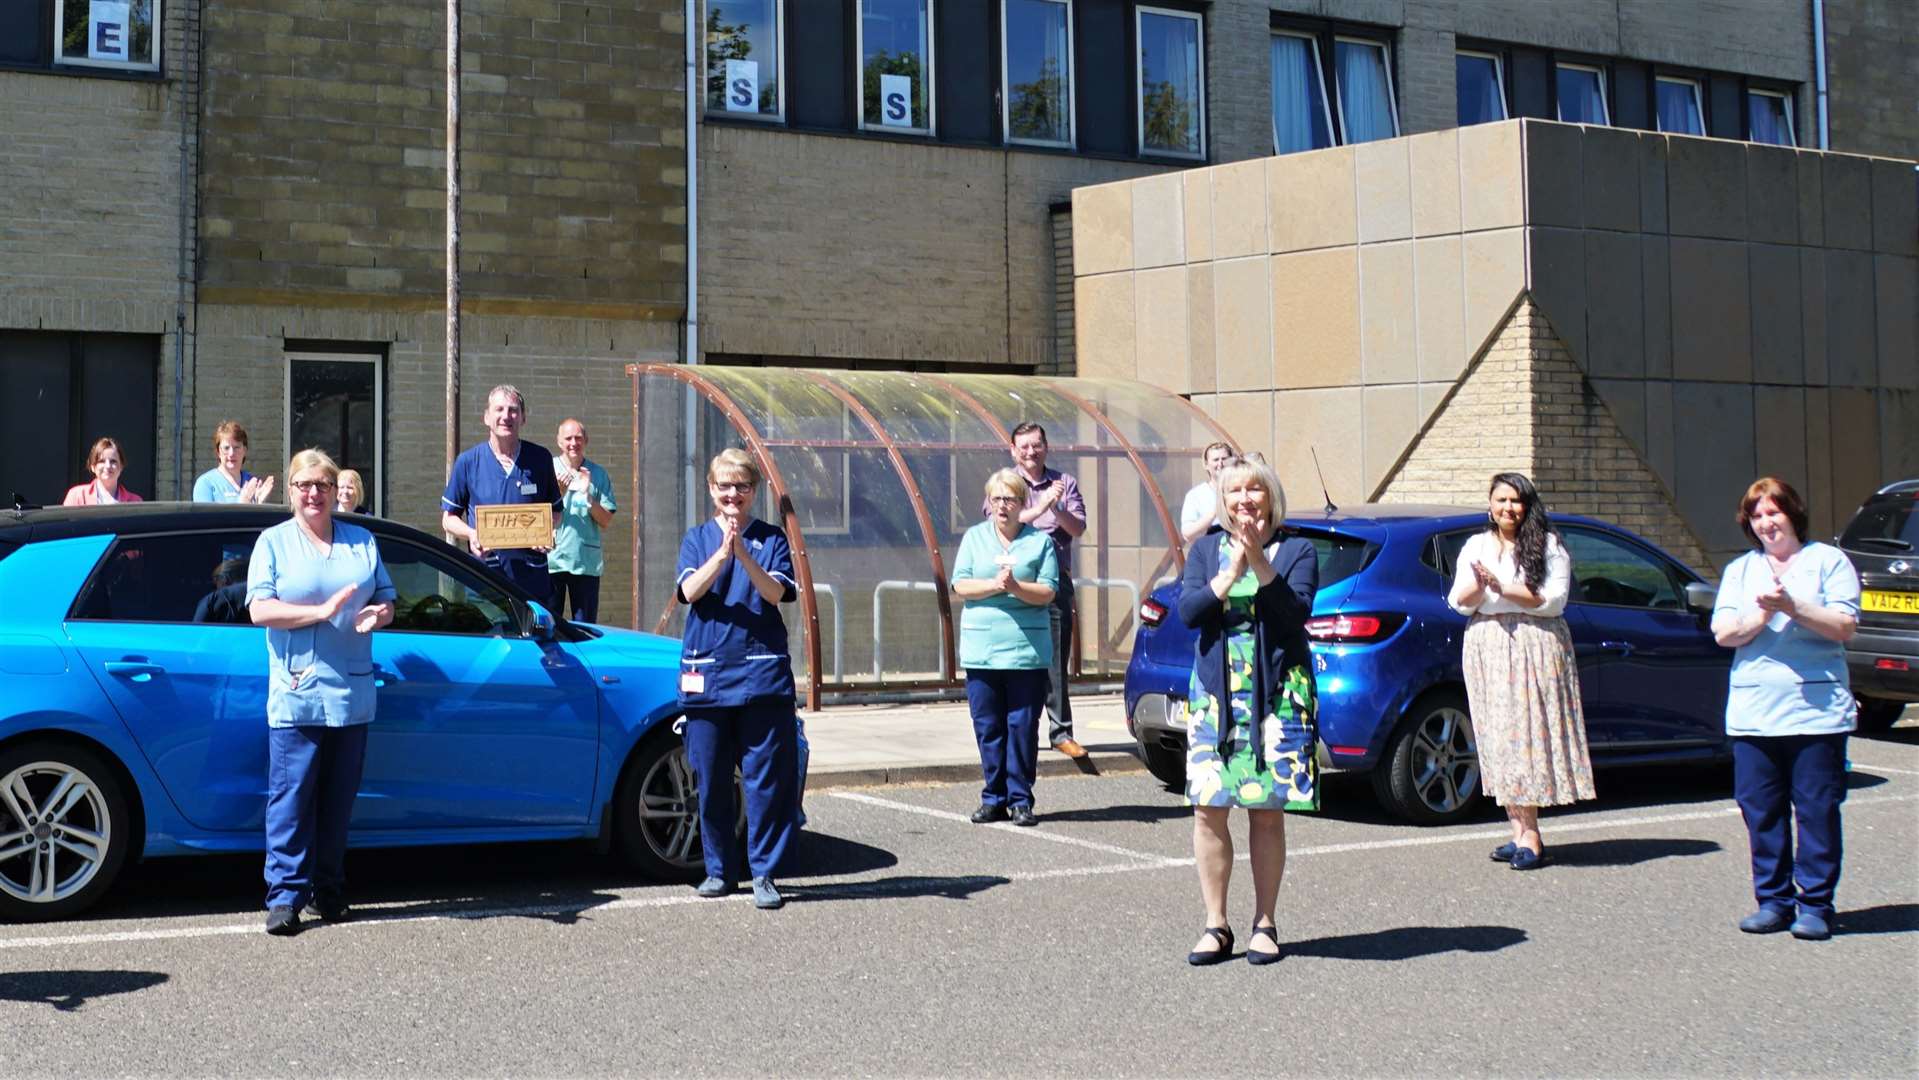 Hospital manager Pam Garbe, third from right, leads a staff clapping event last year. She said the funding 'will improve services locally'. Picture: DGS